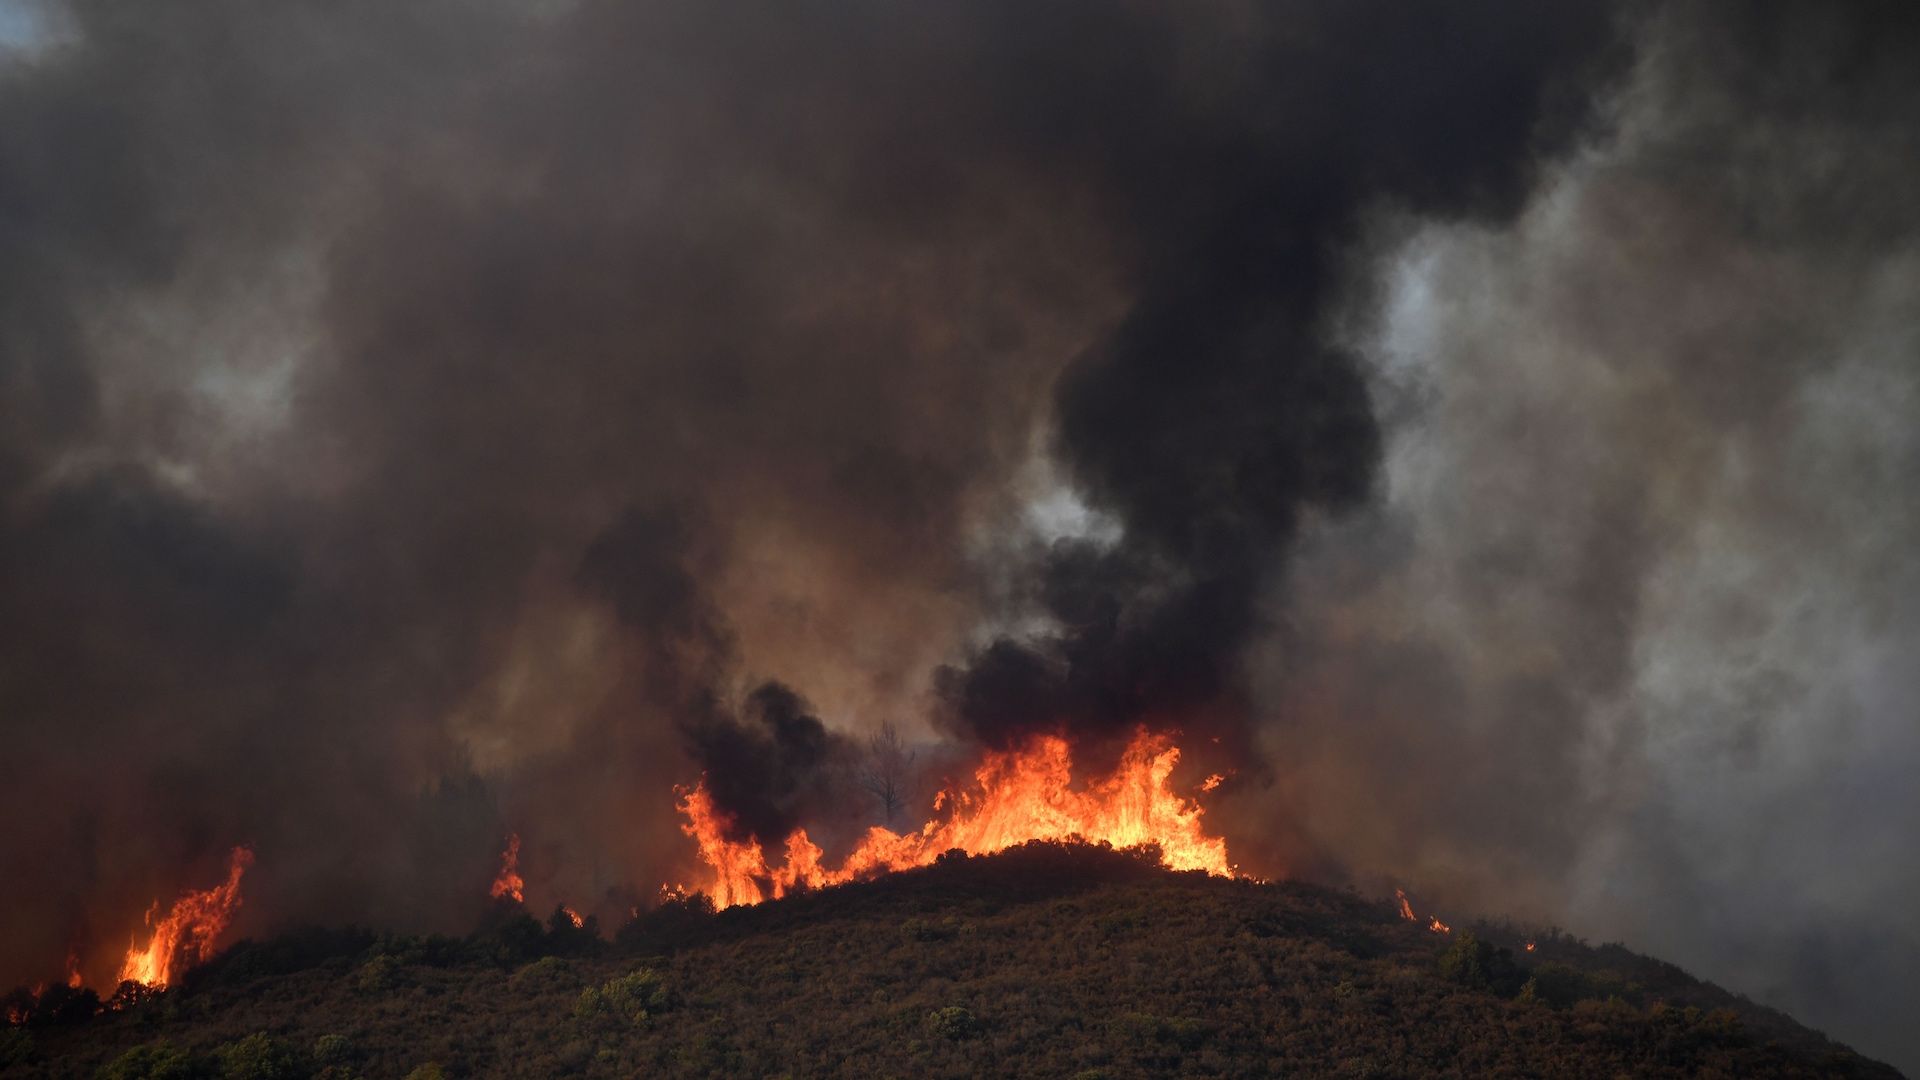 The Ranch fire moves down the ridge as it spreads towards the town of Upper Lake, California on August 1, 2018.